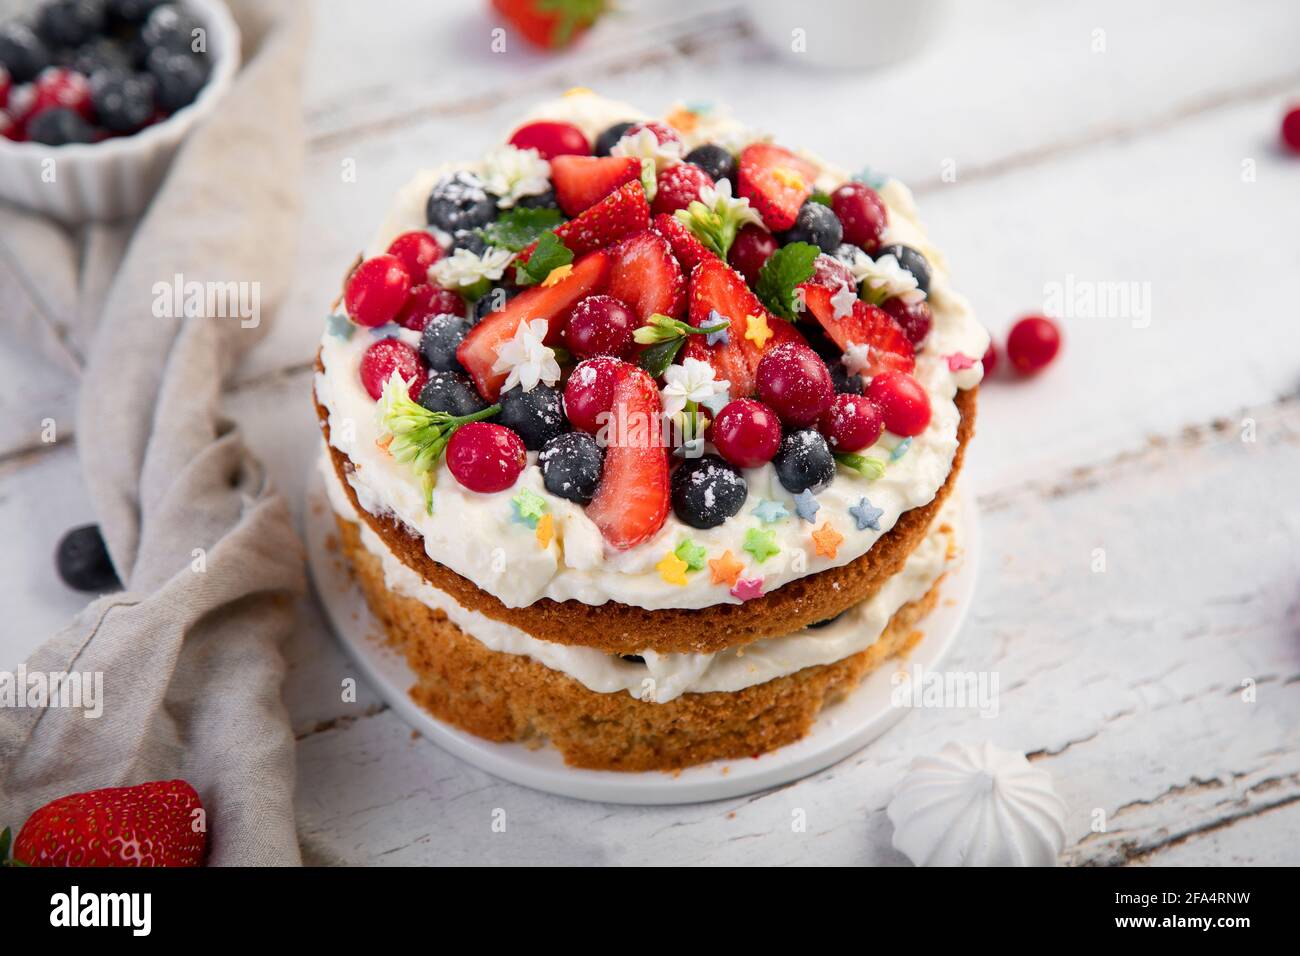 Delicious homemade cake with fresh berries and mascarpone cream on wooden background. Stock Photo